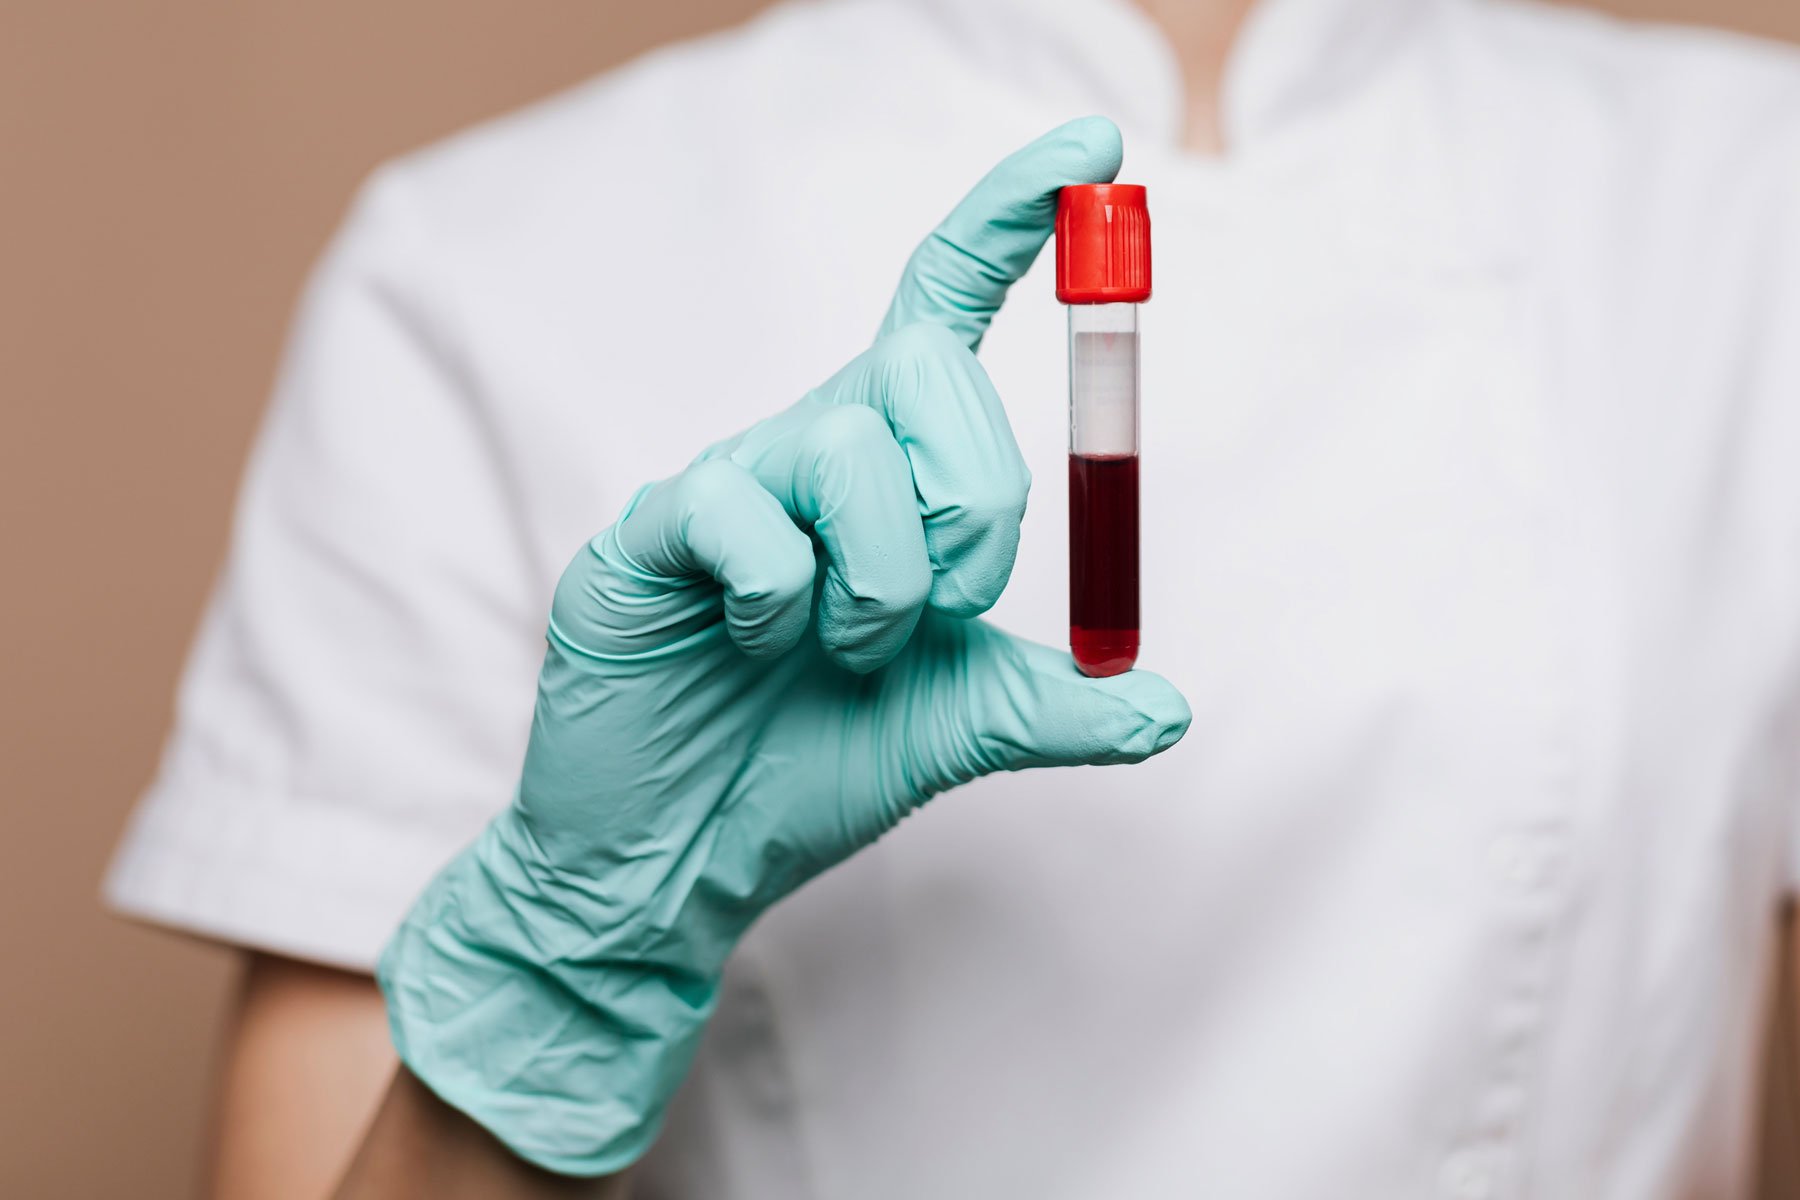 Can blood type affect my blood sugar? Probably not